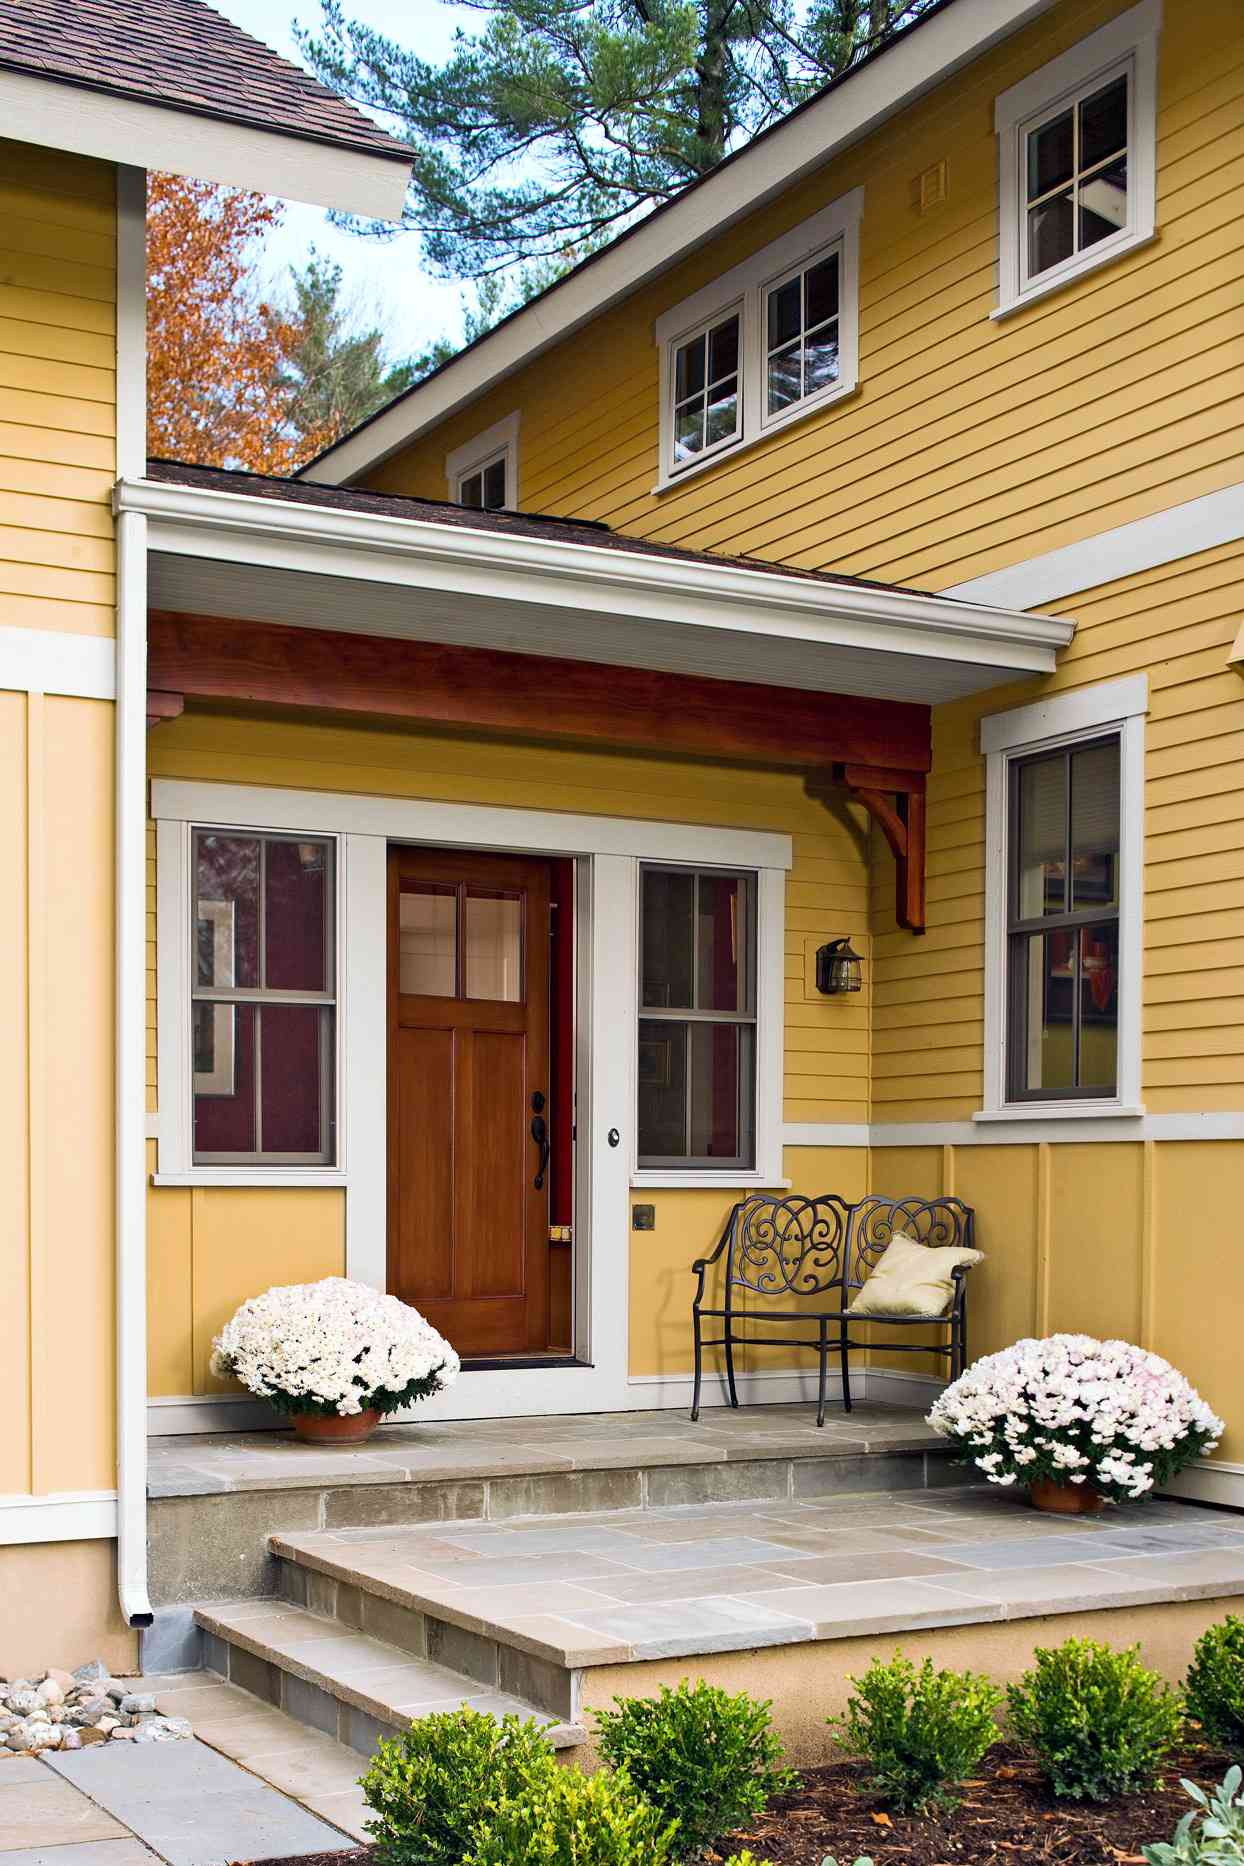 Curb Appeal in a Month: Tile Your Doorstep